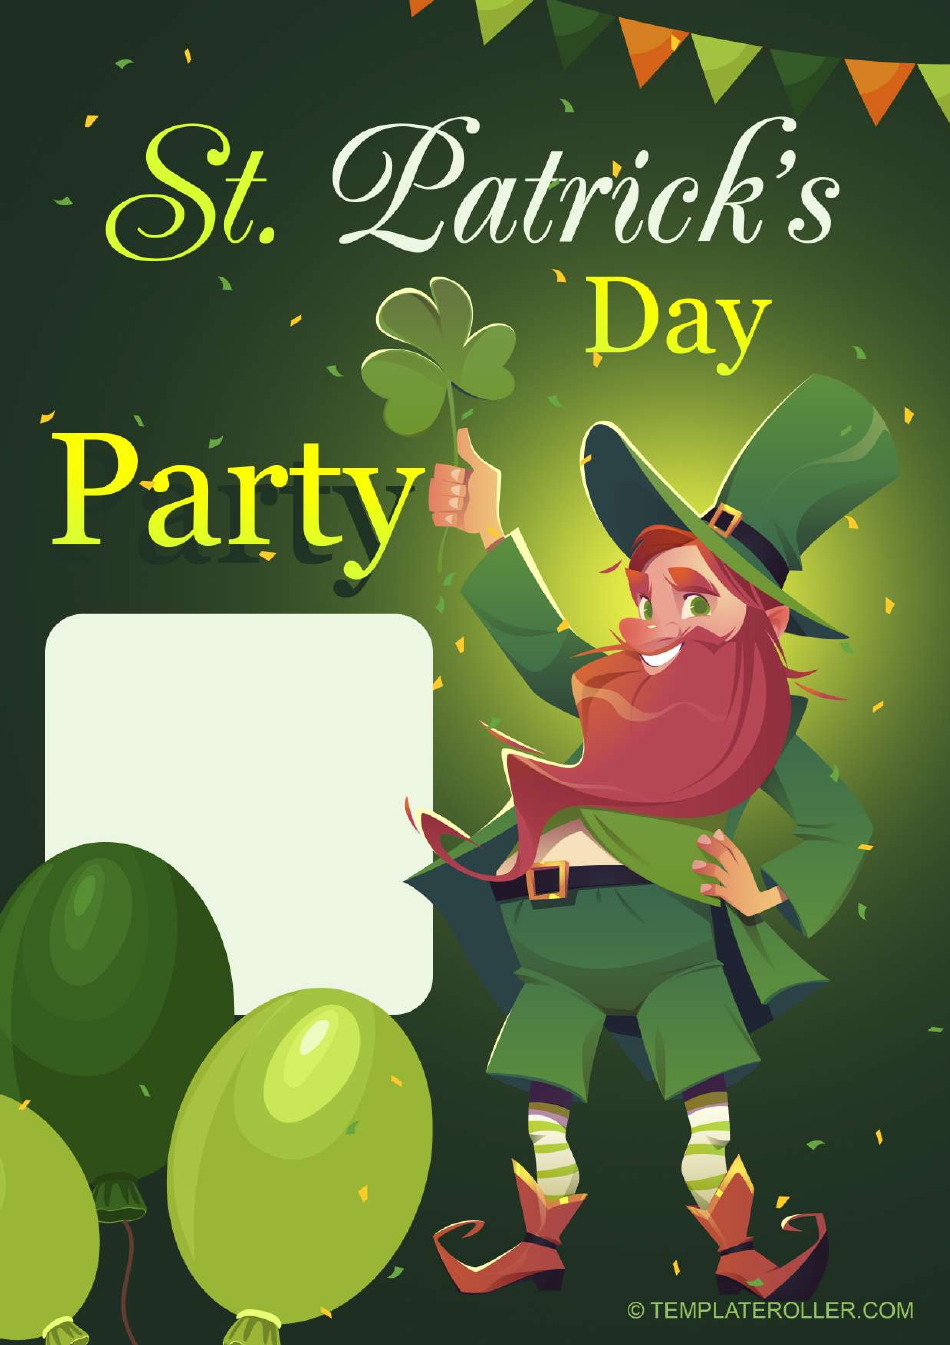 St. Patricks Day Flyer - Party, Page 1